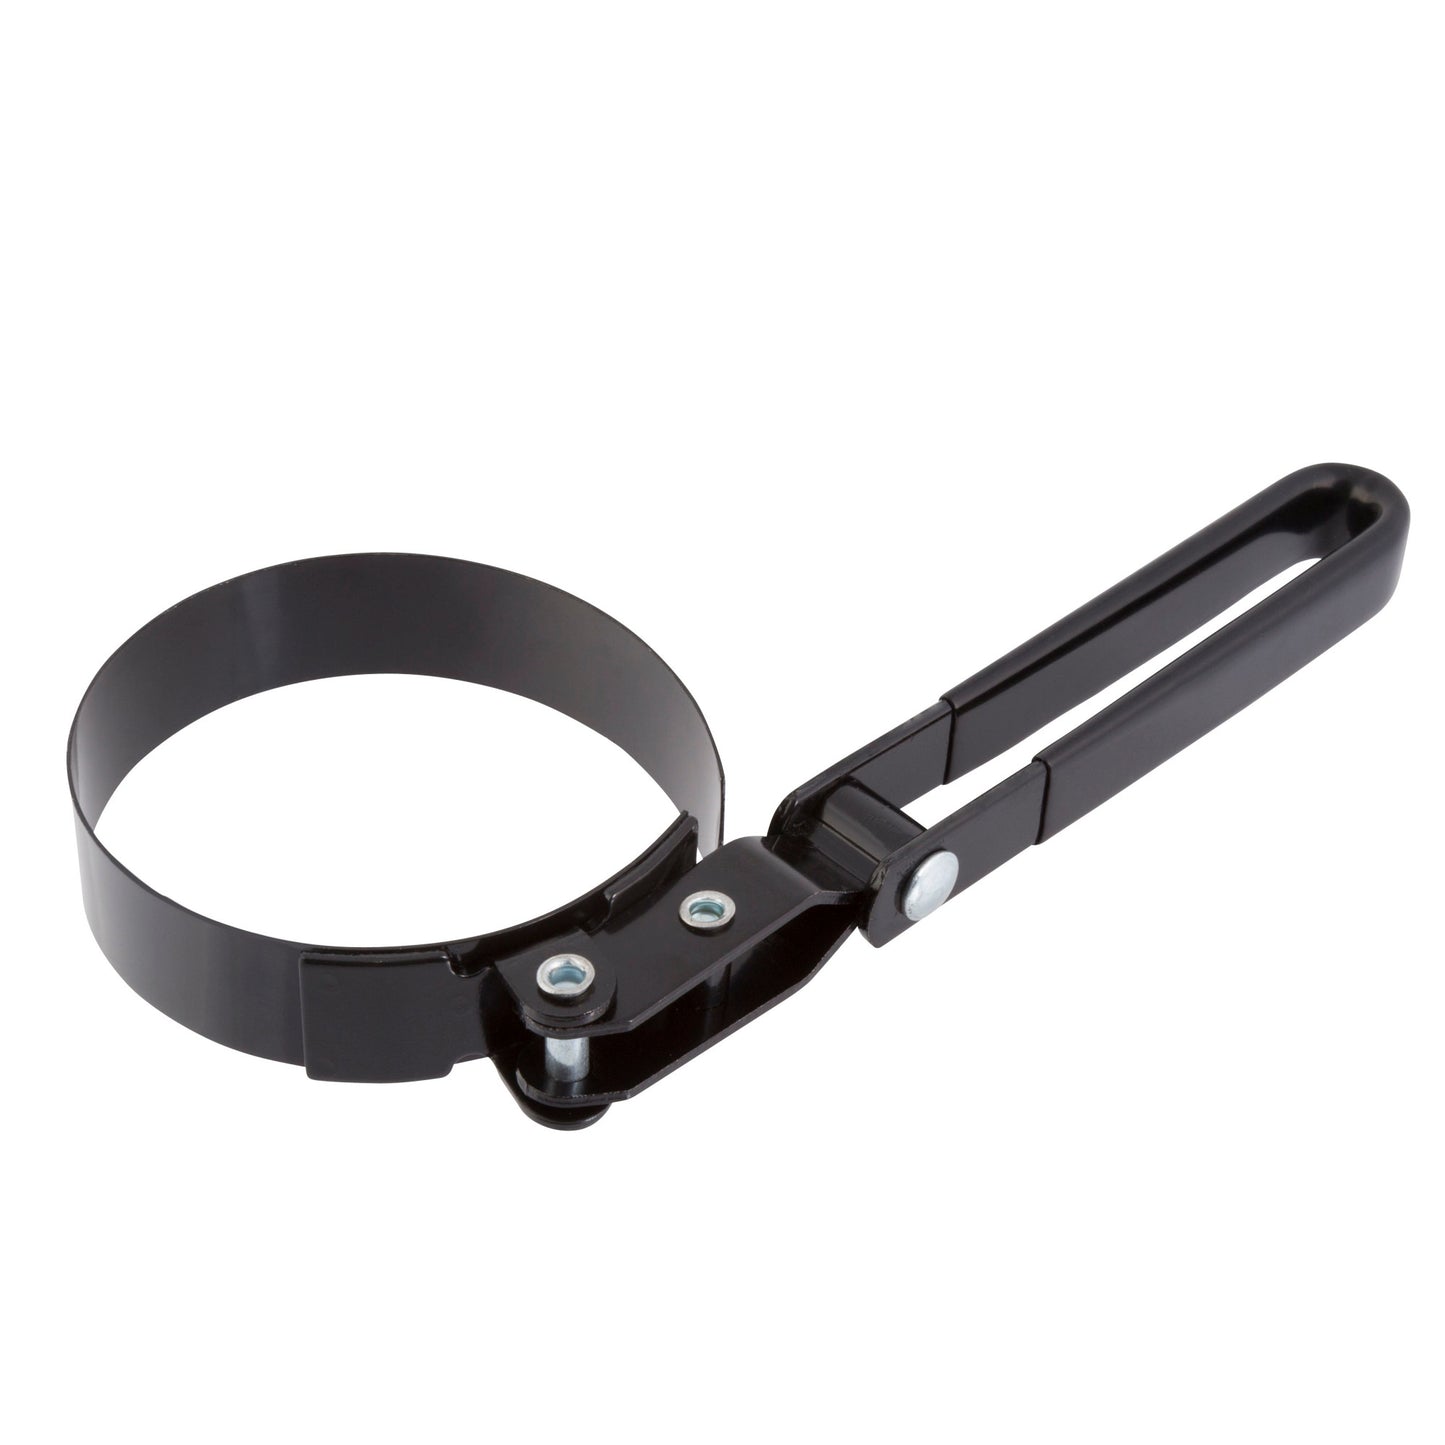 Oil Filter Wrench 2-7/8-inch to 3-1/4-inch